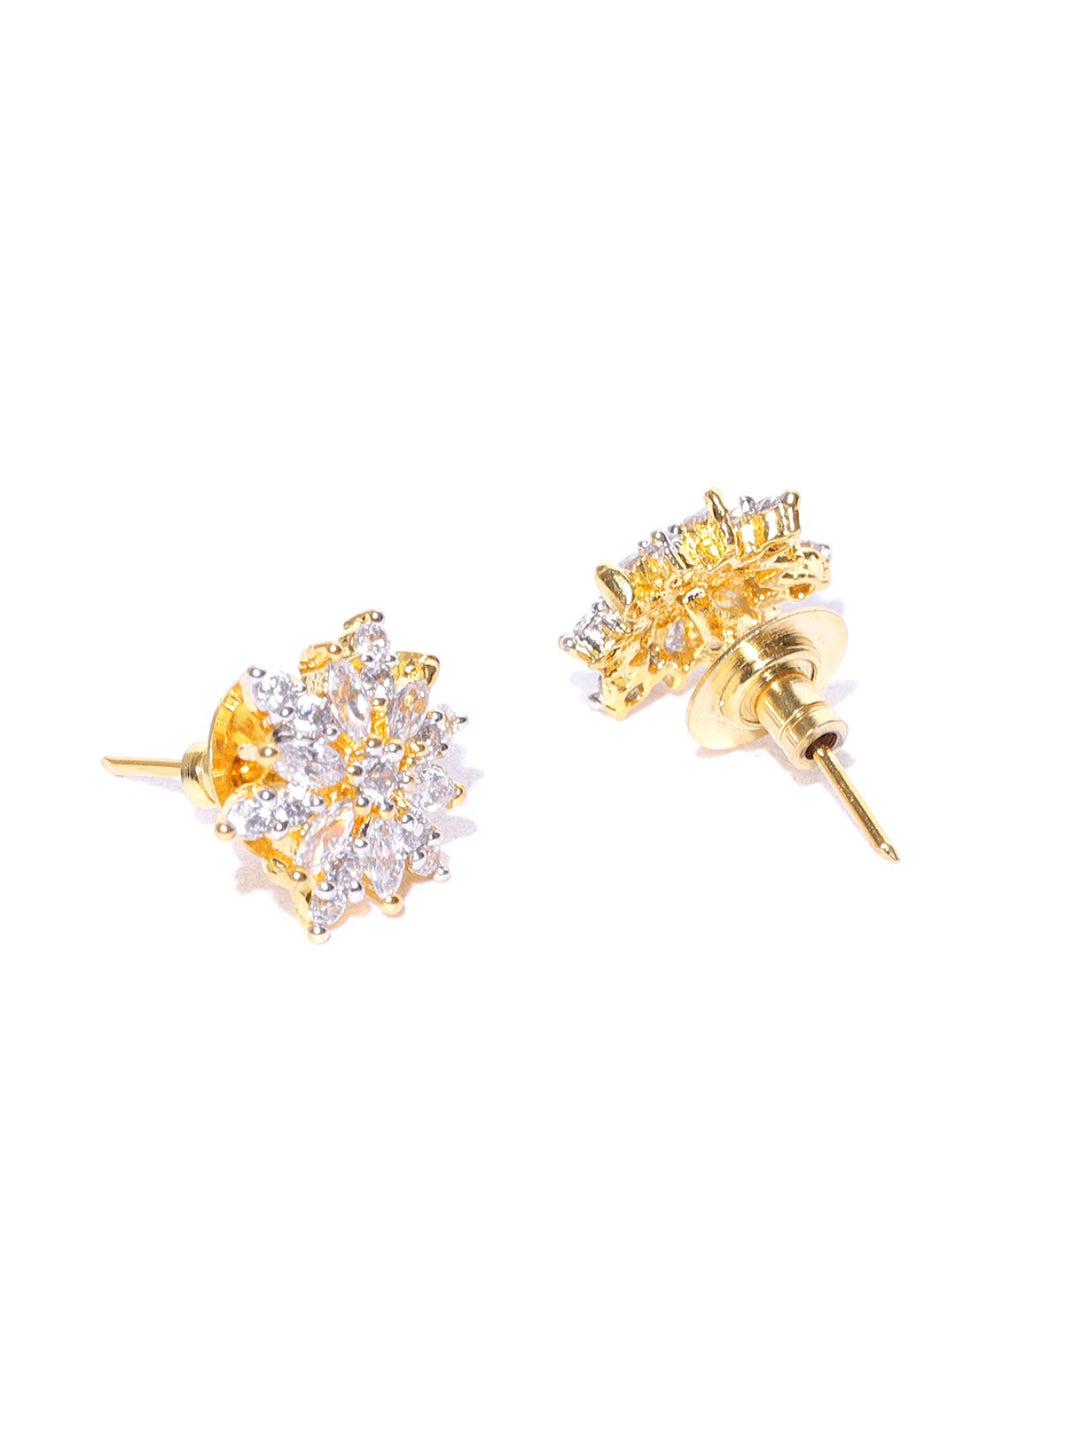 Stylish Gold Plated Floral American Diamond Stud Earring For Women And Girls